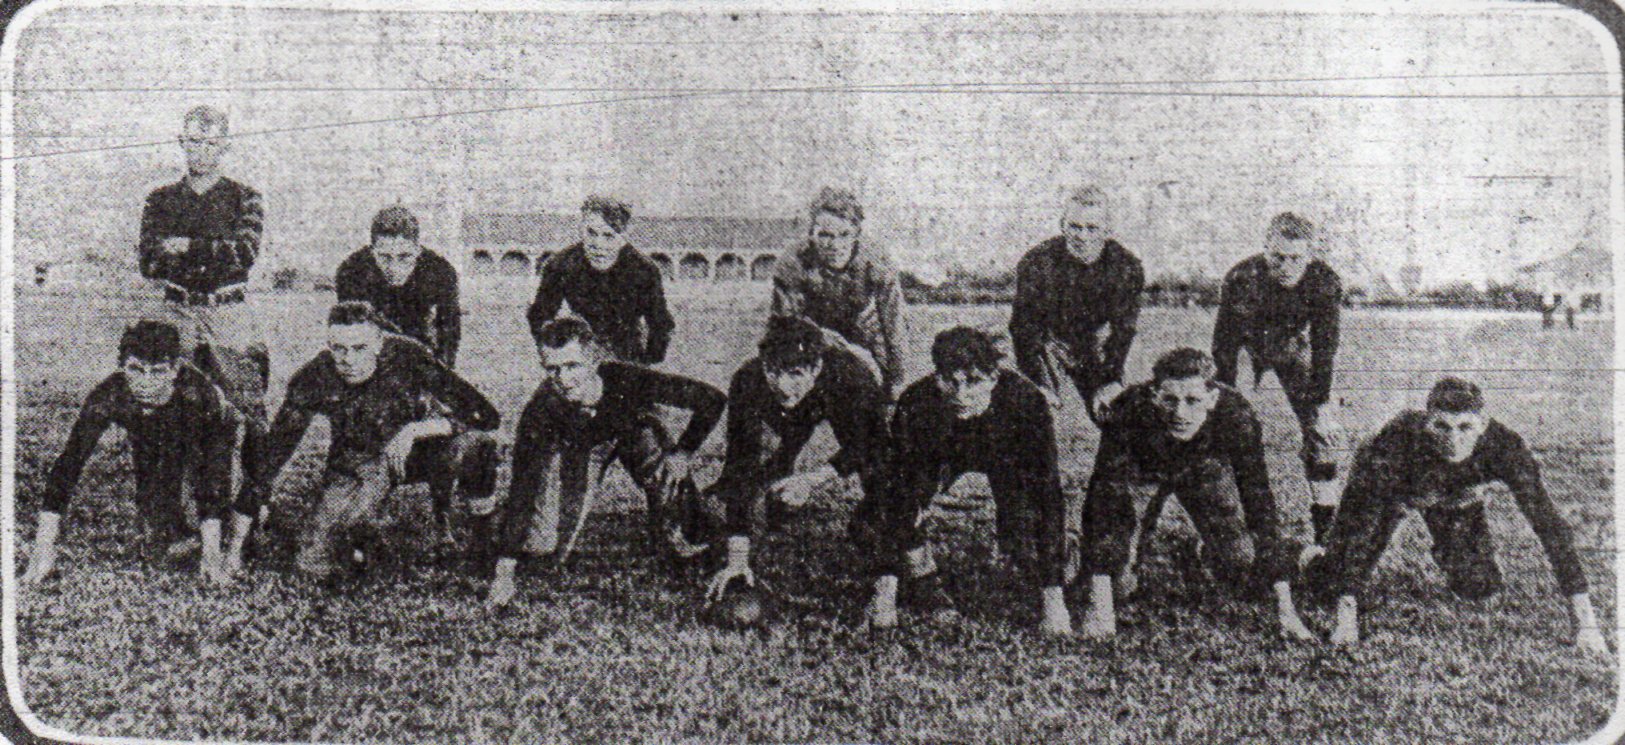 New coach Nibs Price (top row, left) posed with his gridders on Russ Oval before Thanksgiving Day game with Whittier that attracted large crowd of 2,500 to Coronado Polo Grounds. Capt. Leslie Dana is second from right, top row.